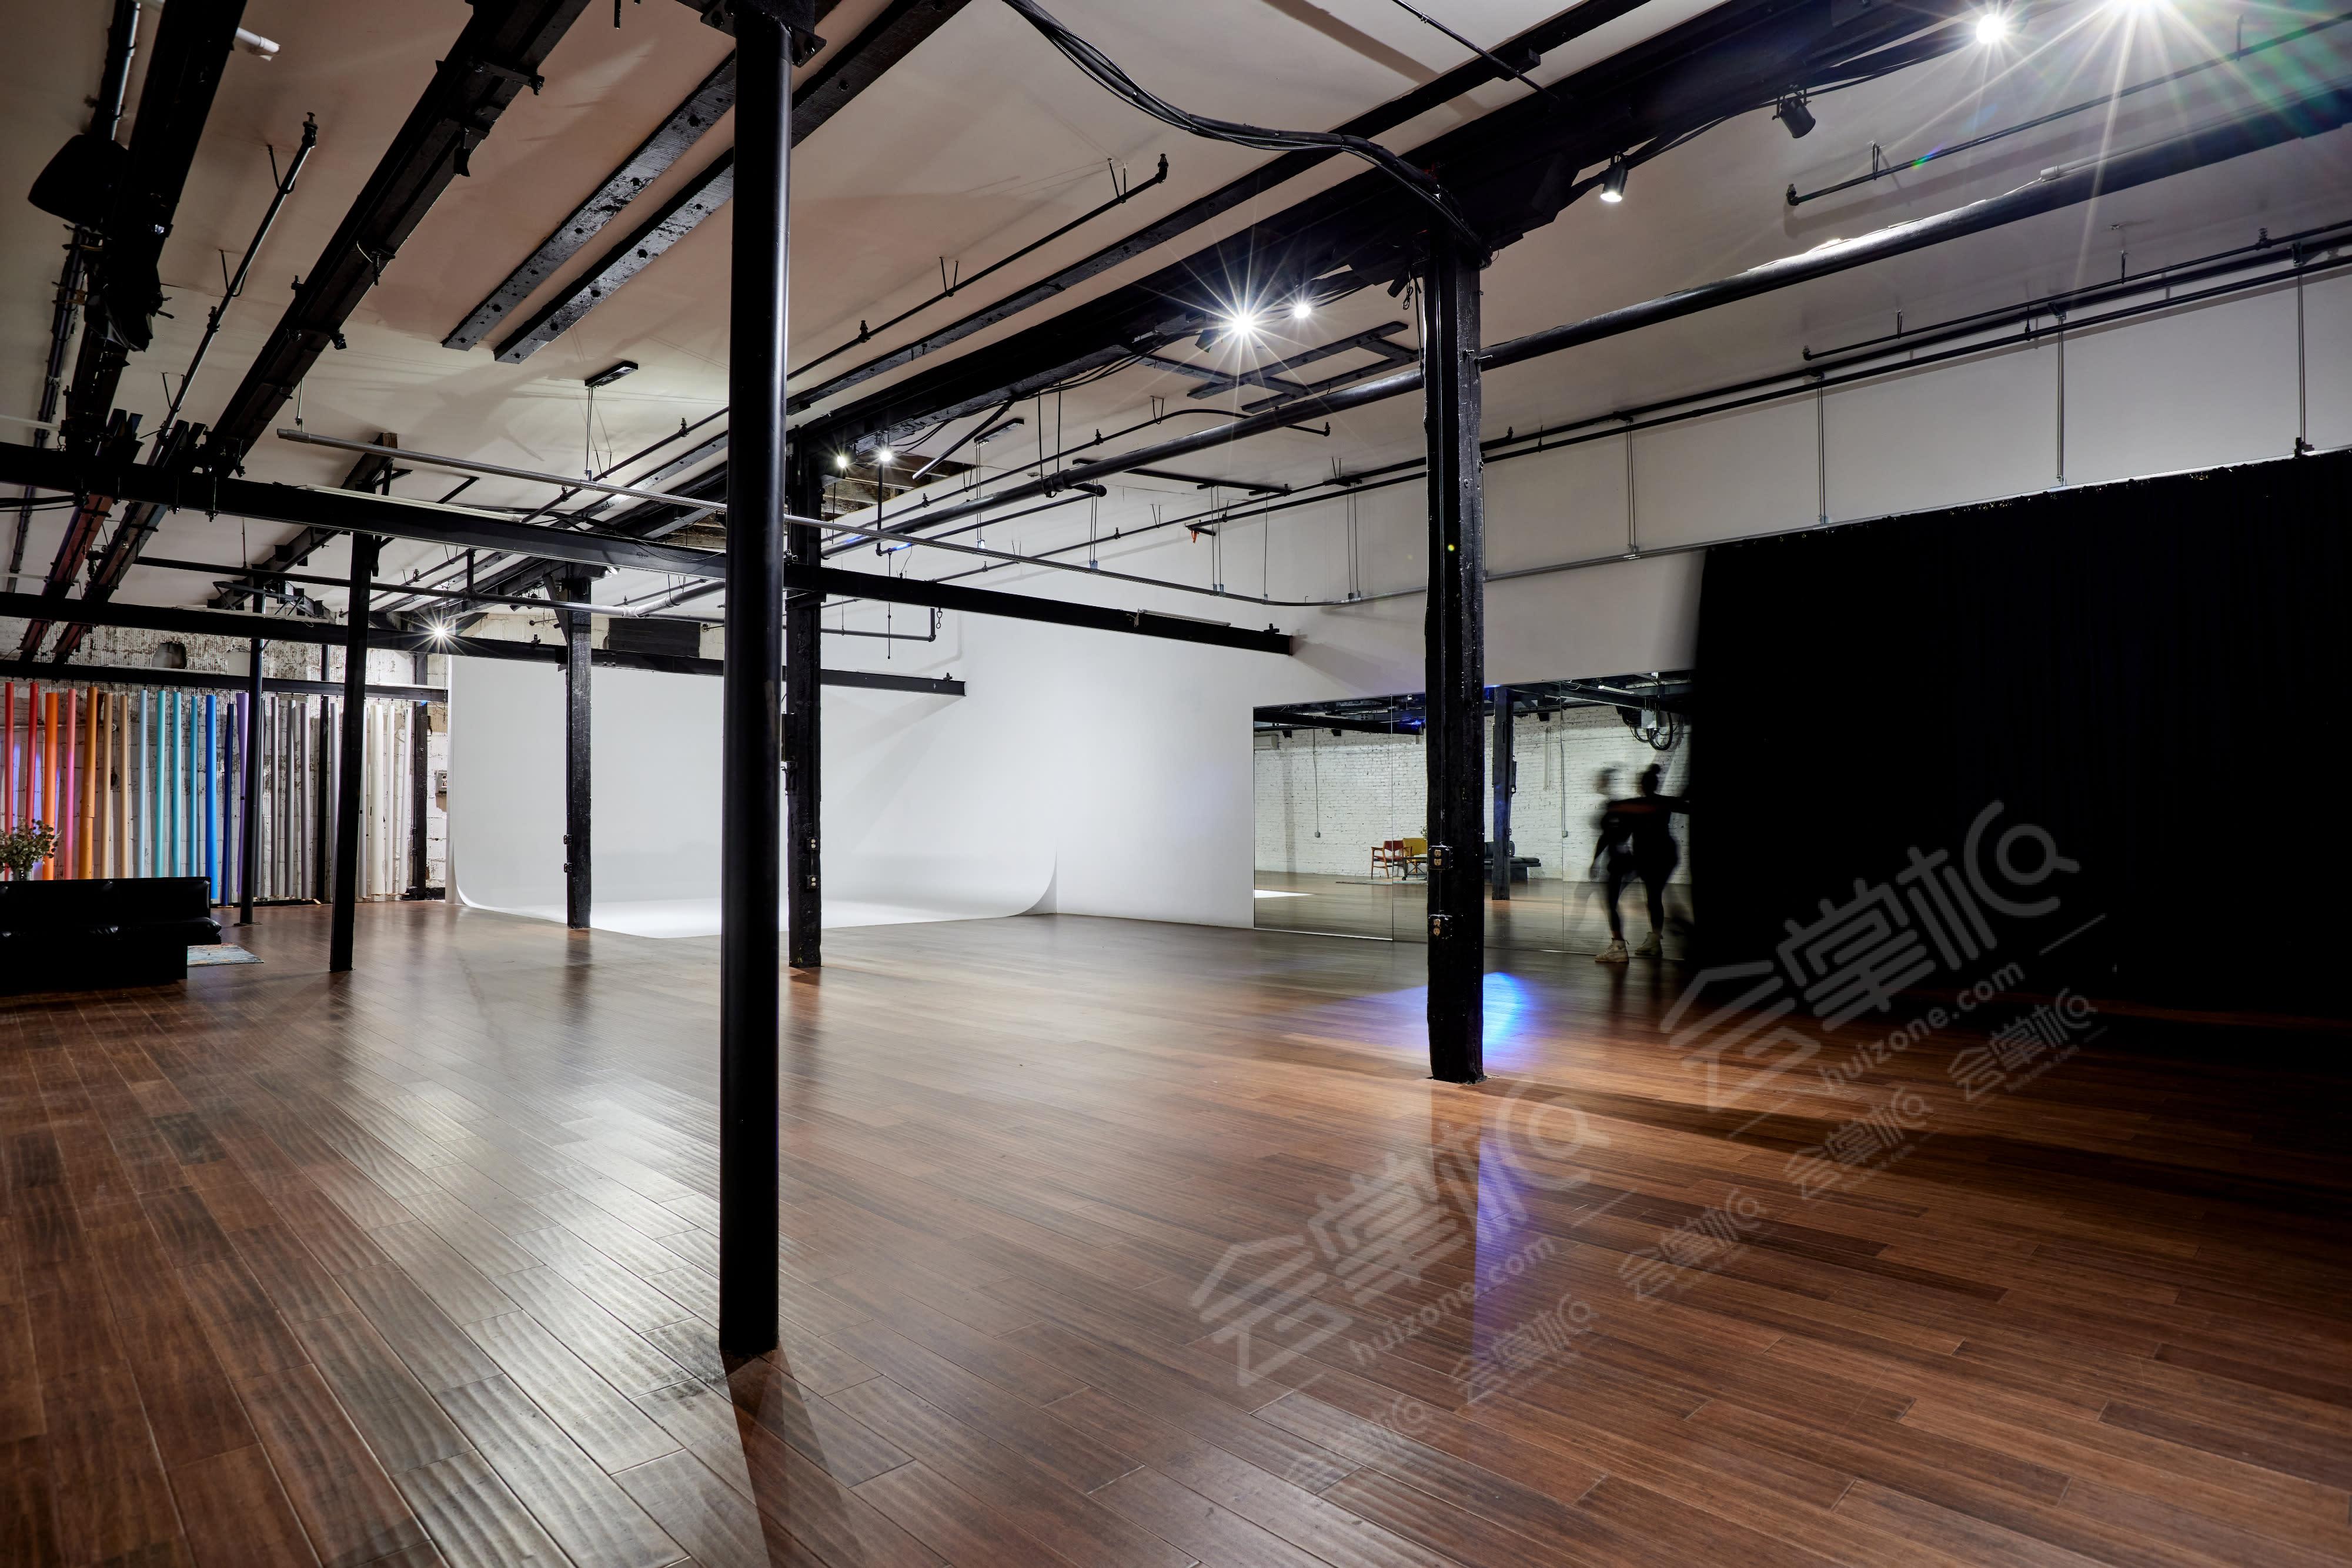 Downtown Historic Factory Complex Turned Film & Photo Studio With 2-wall Cyc